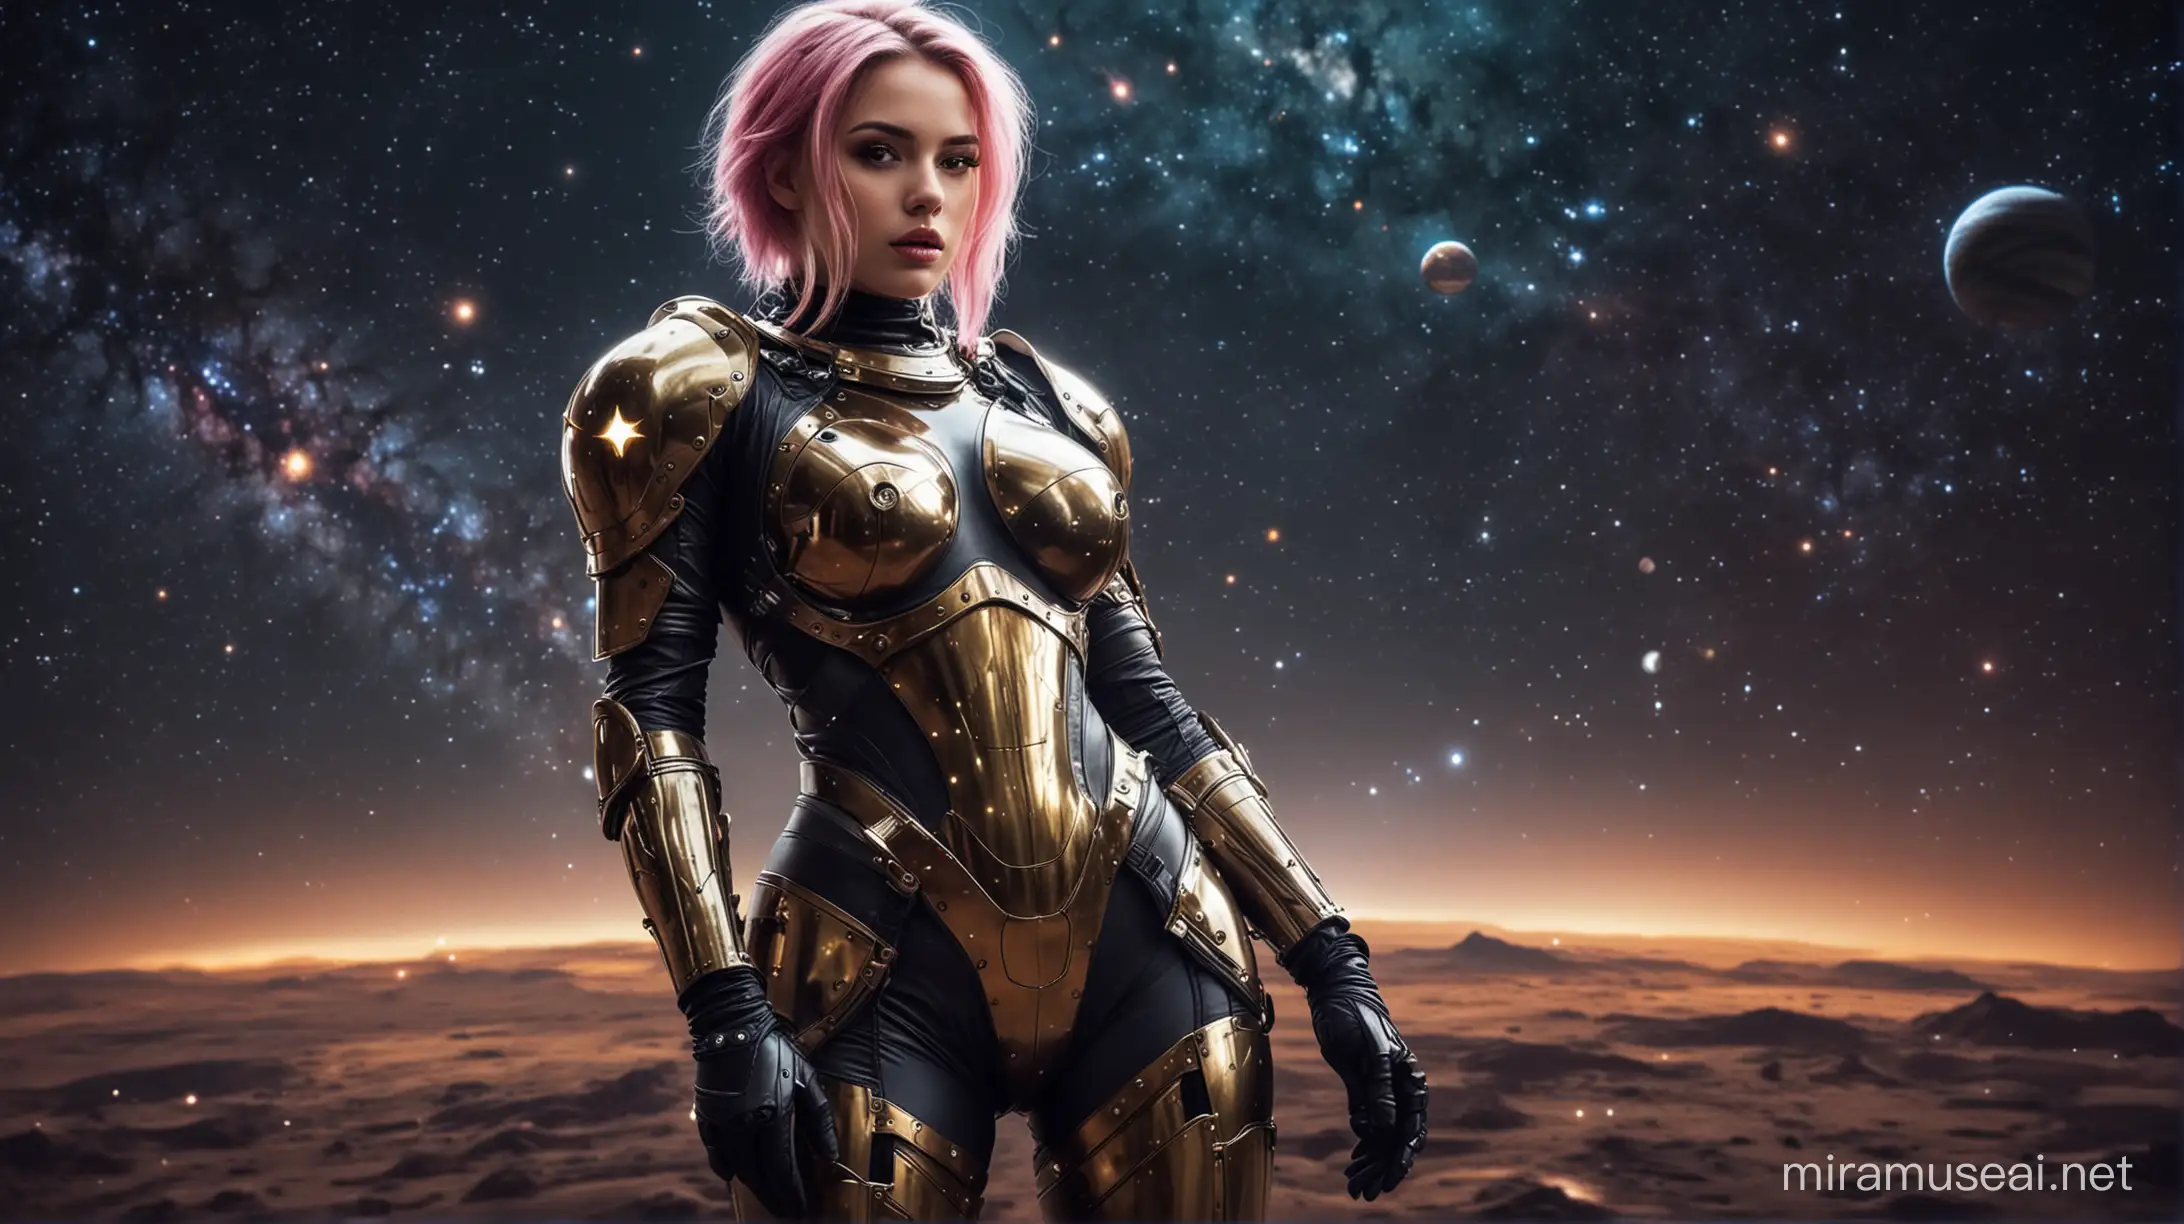 Sexy knight girl, graceful, soldier style hair, complicated hair style, colorful hair, sexy makeup, fat lips, very big boobs, round boobs, full body, tight spacesuit, black and gold spacesuit, armored spacesuit, glowing spacesuit, space, stars, galaxies, planets 